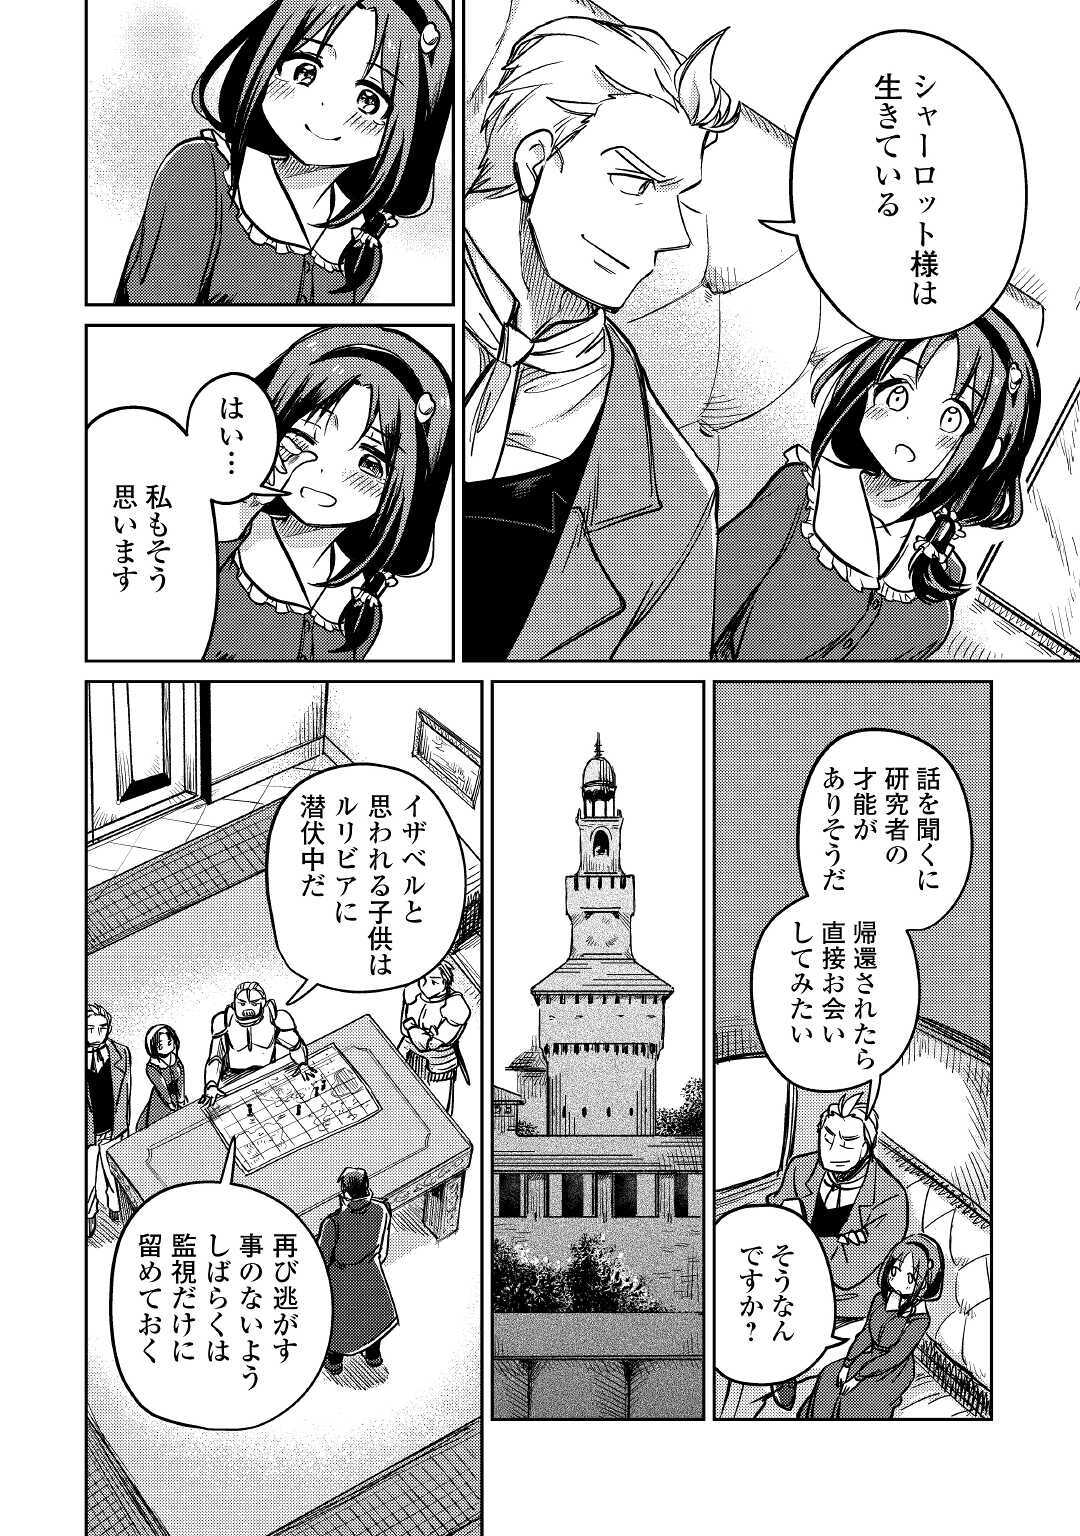 The Former Structural Researcher’s Story of Otherworldly Adventure 第28話 - Page 14